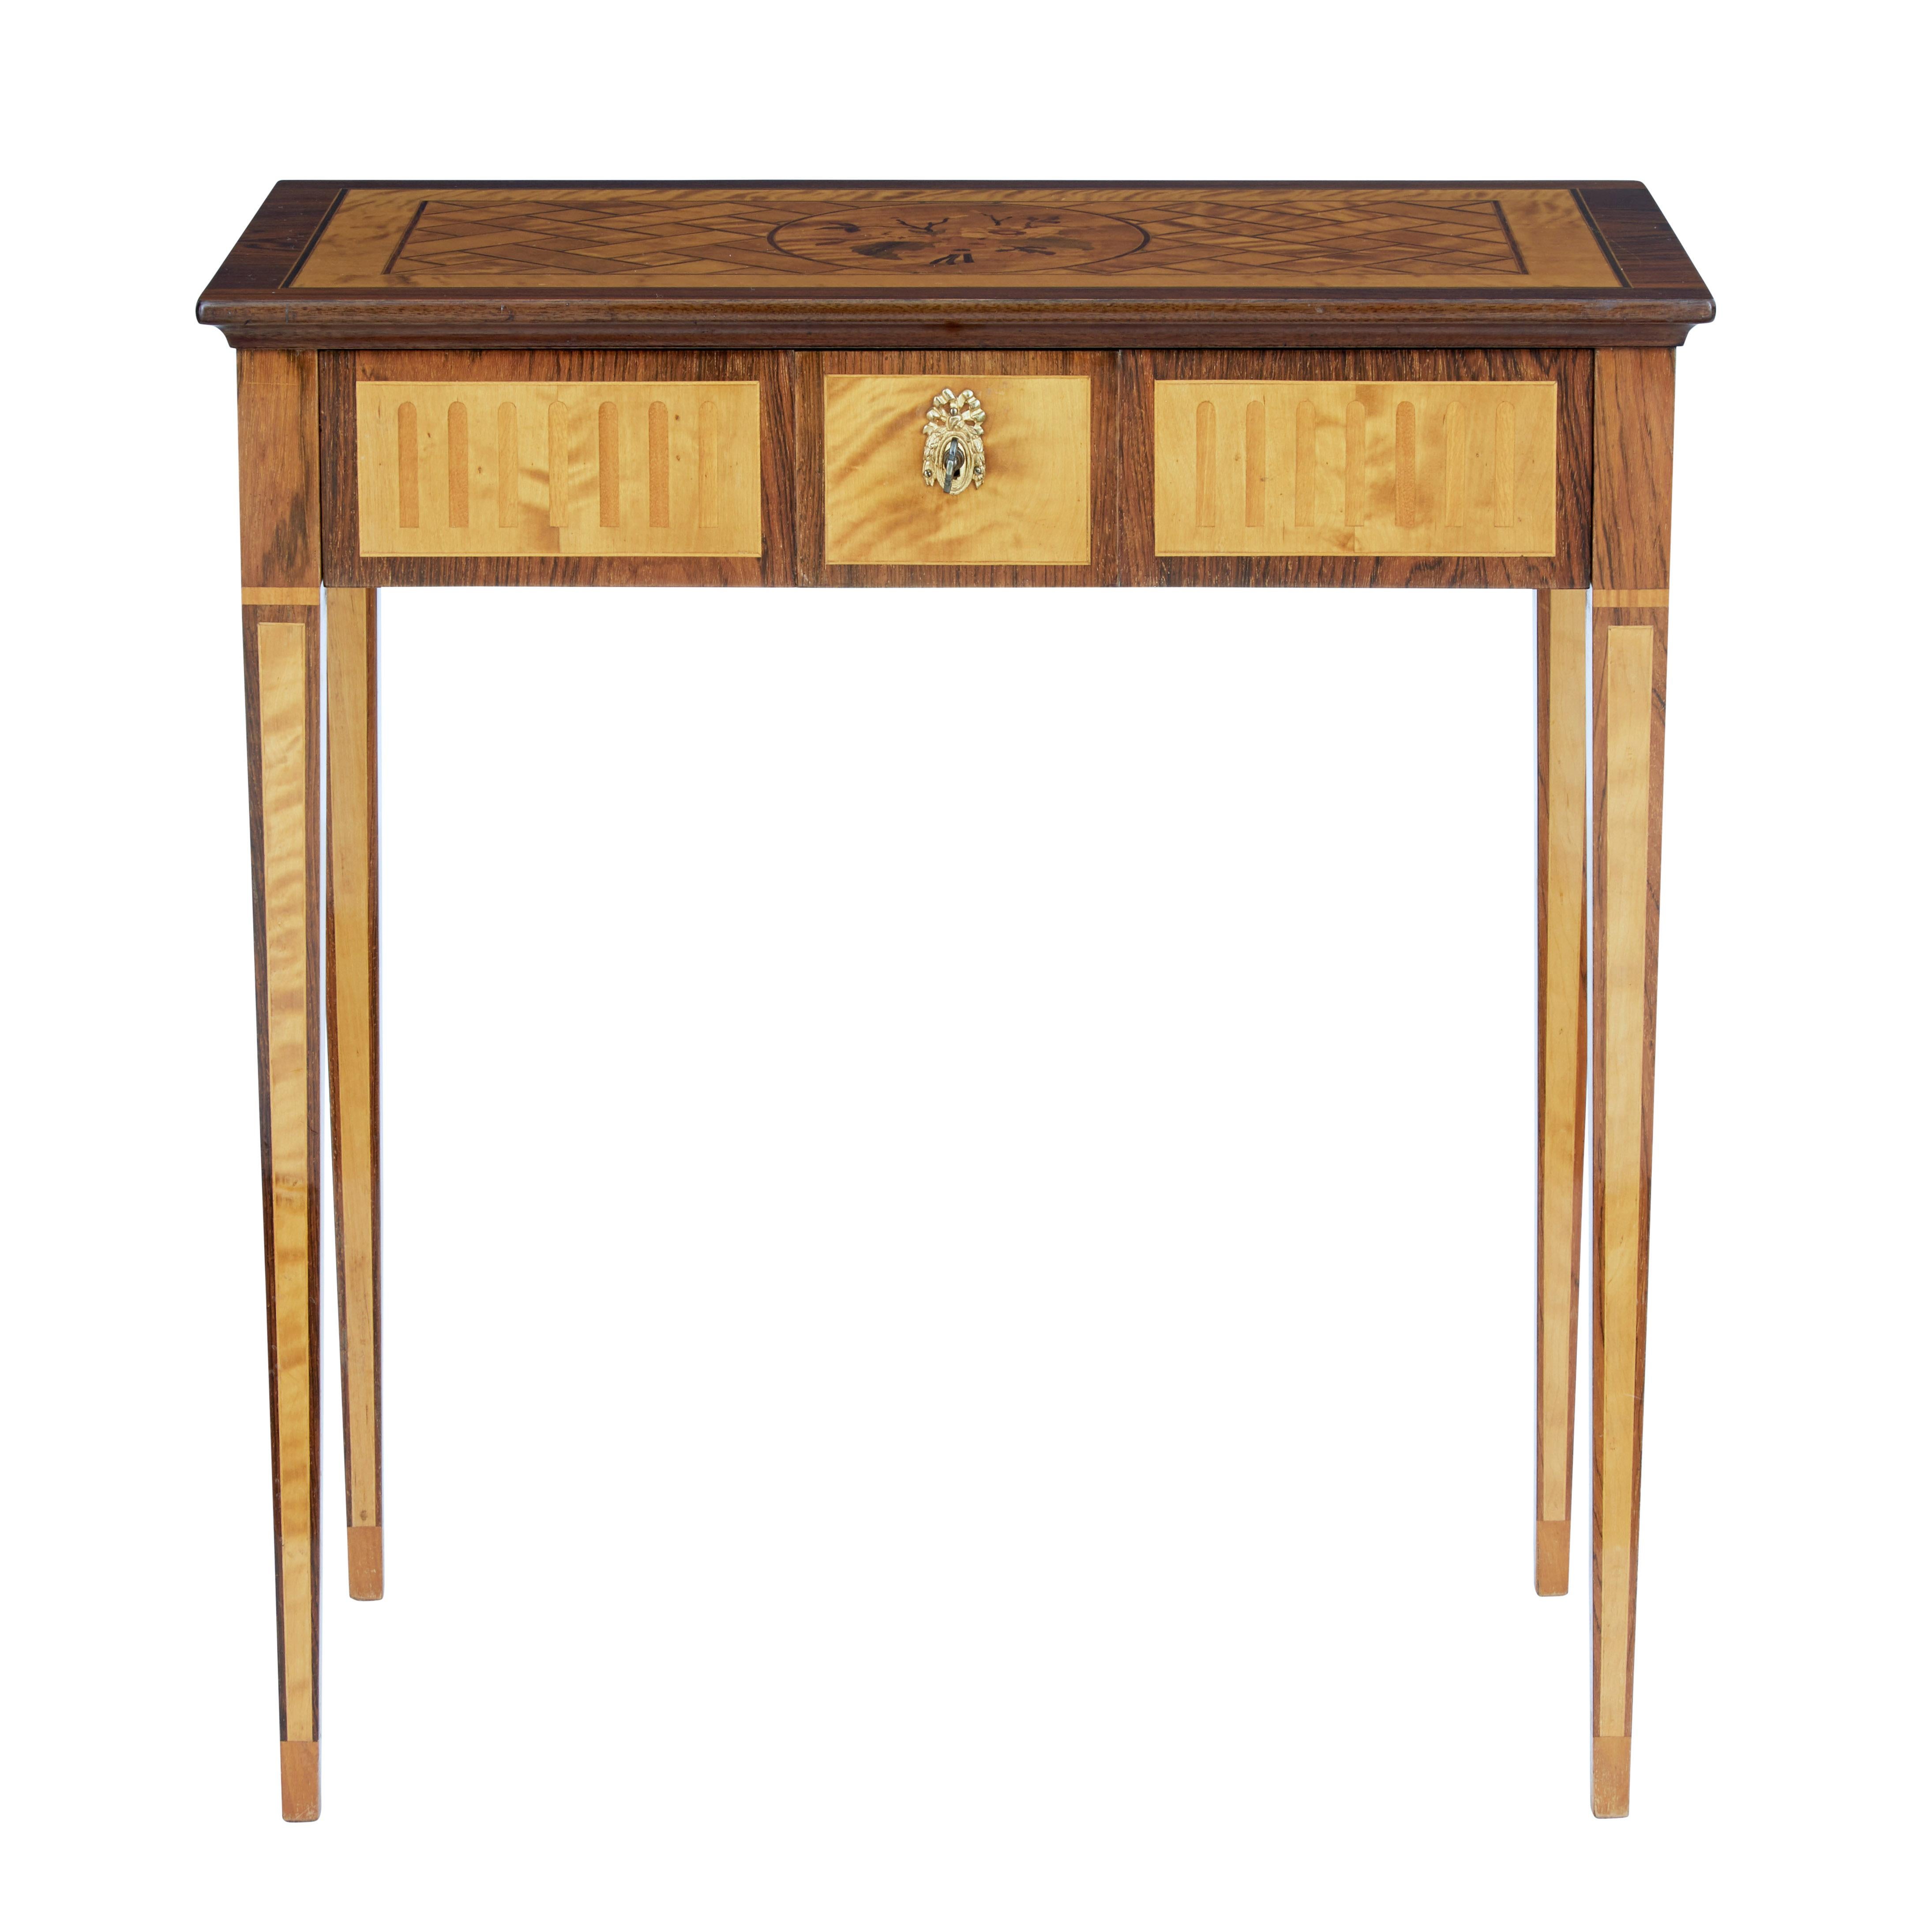 Beautifully inlaid occasional table made in Sweden in the 1940s.

Top inlaid with a central floral motif further strung with walnut and satinwood forming a pattern. Single drawer with fitted partitions working key and lock.

Standing on 4